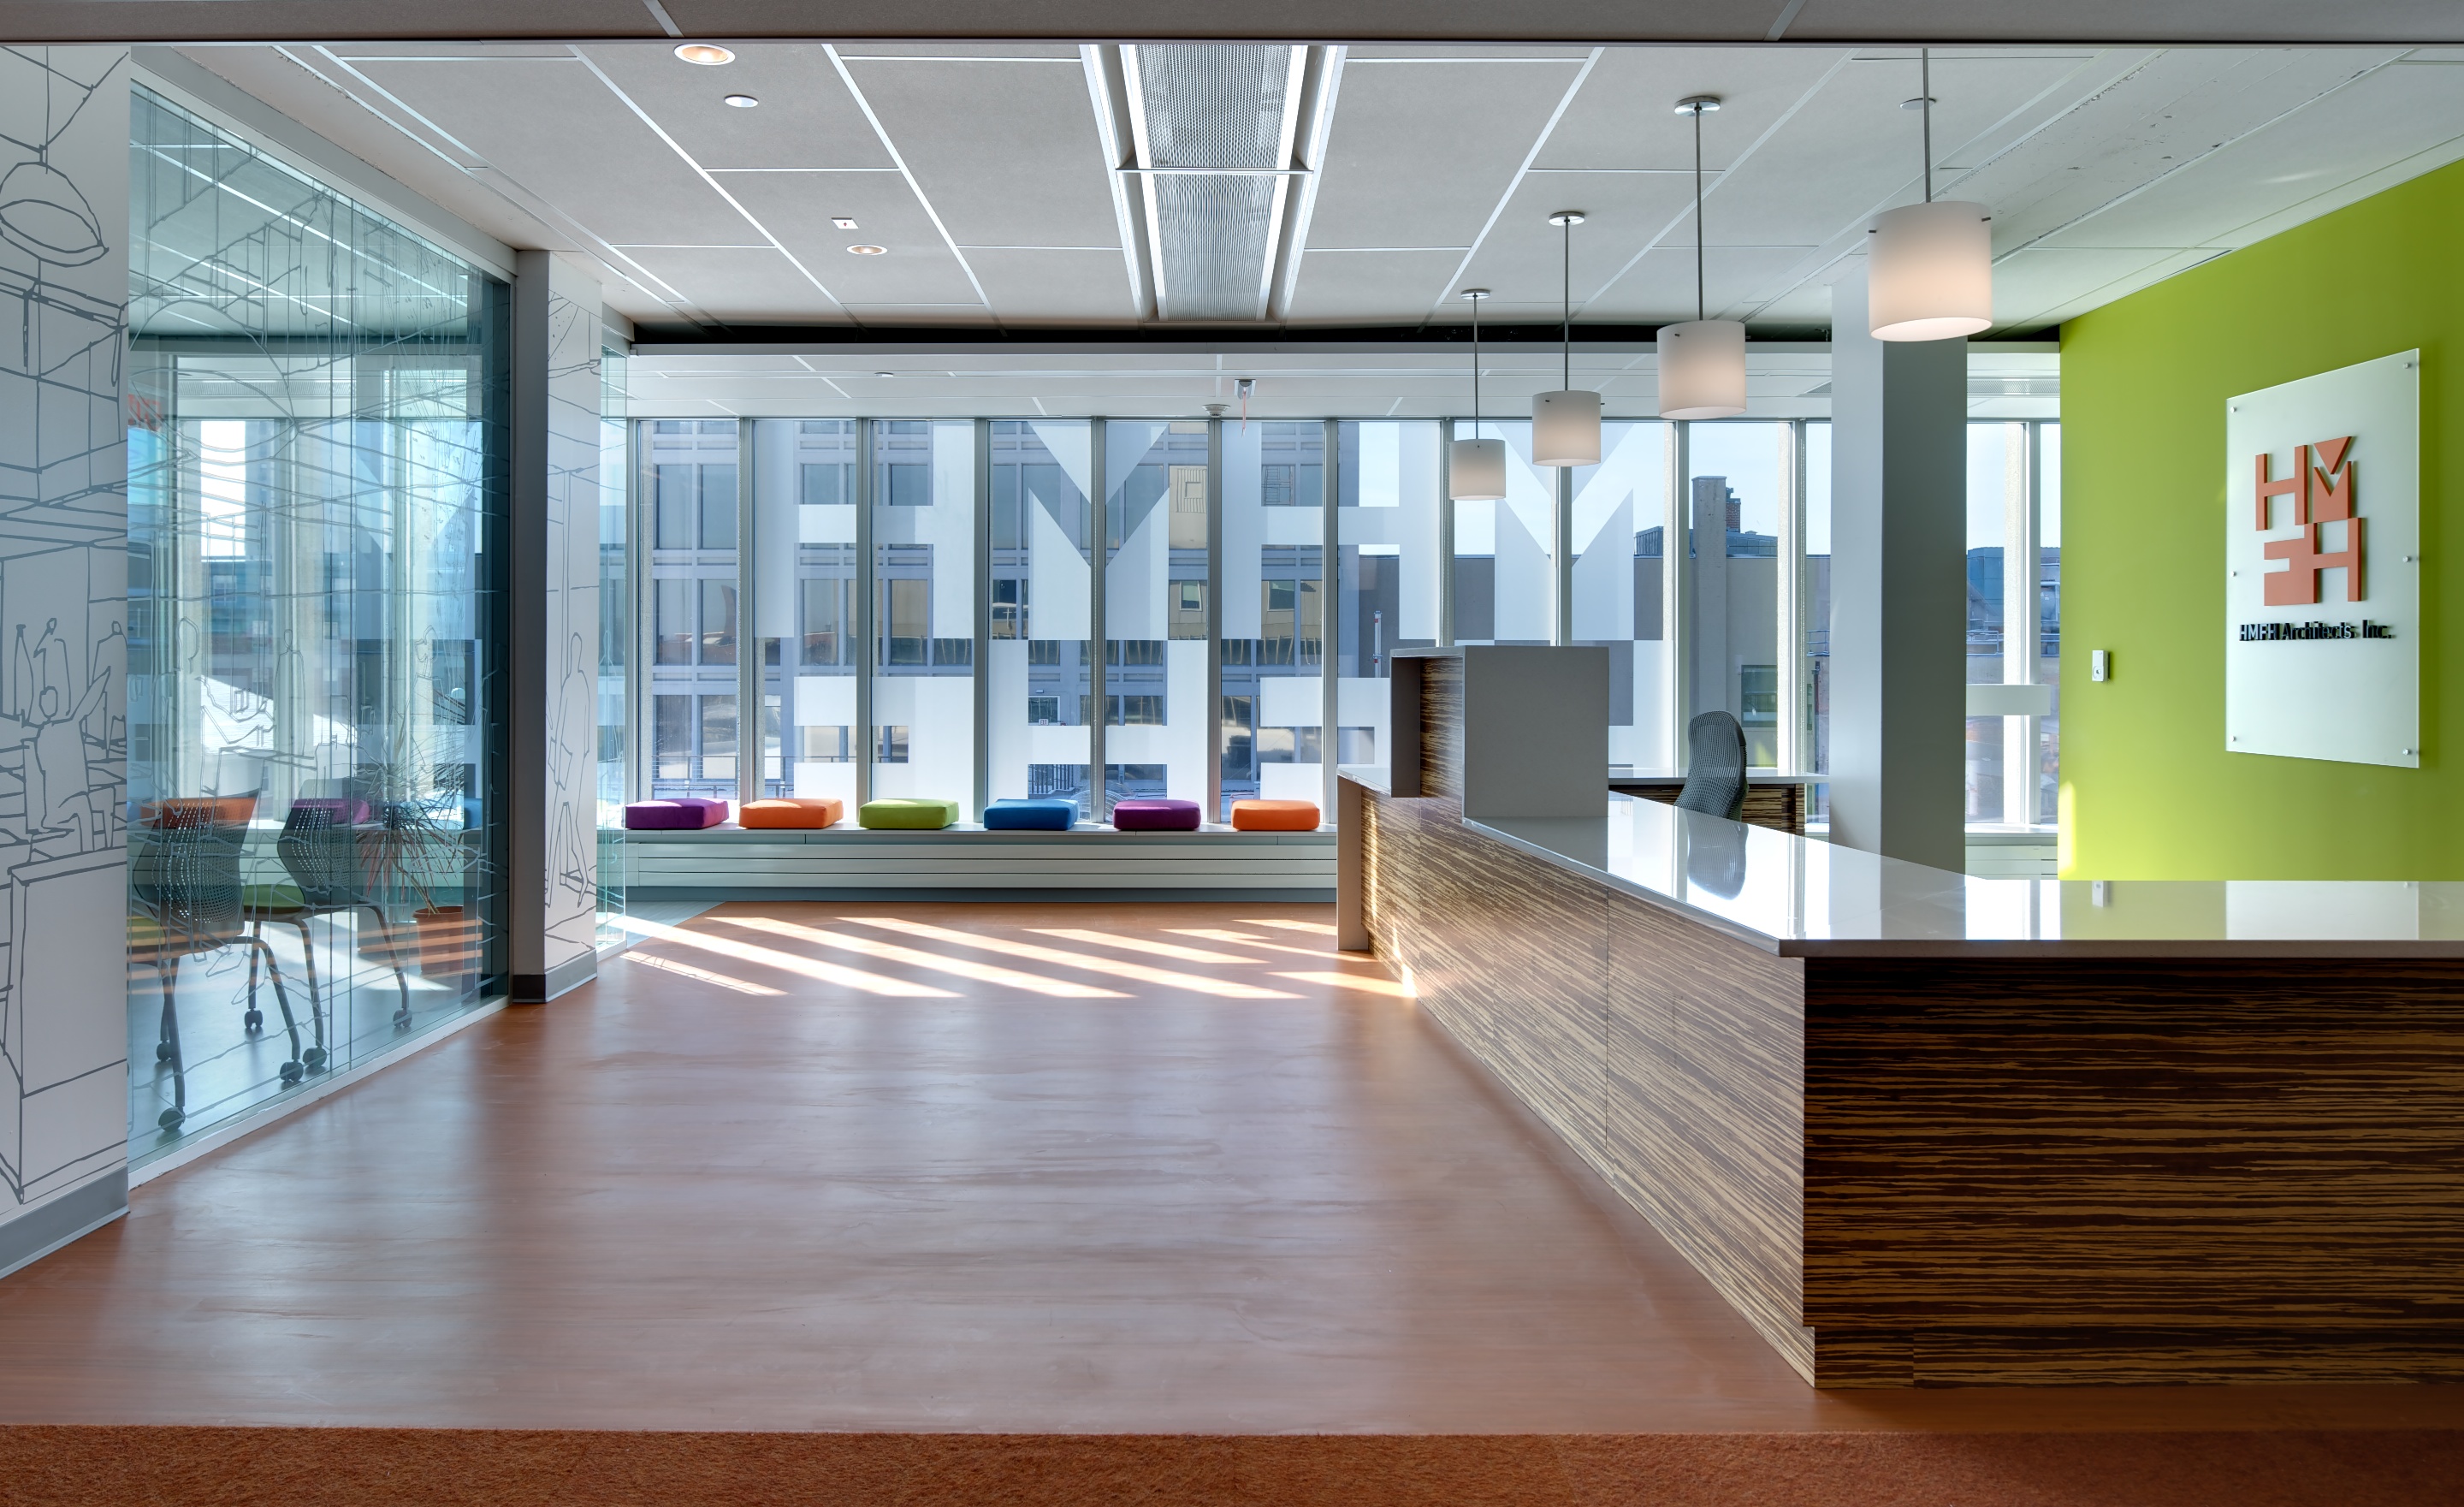 Active chilled beams installed in the ceiling of a modern office